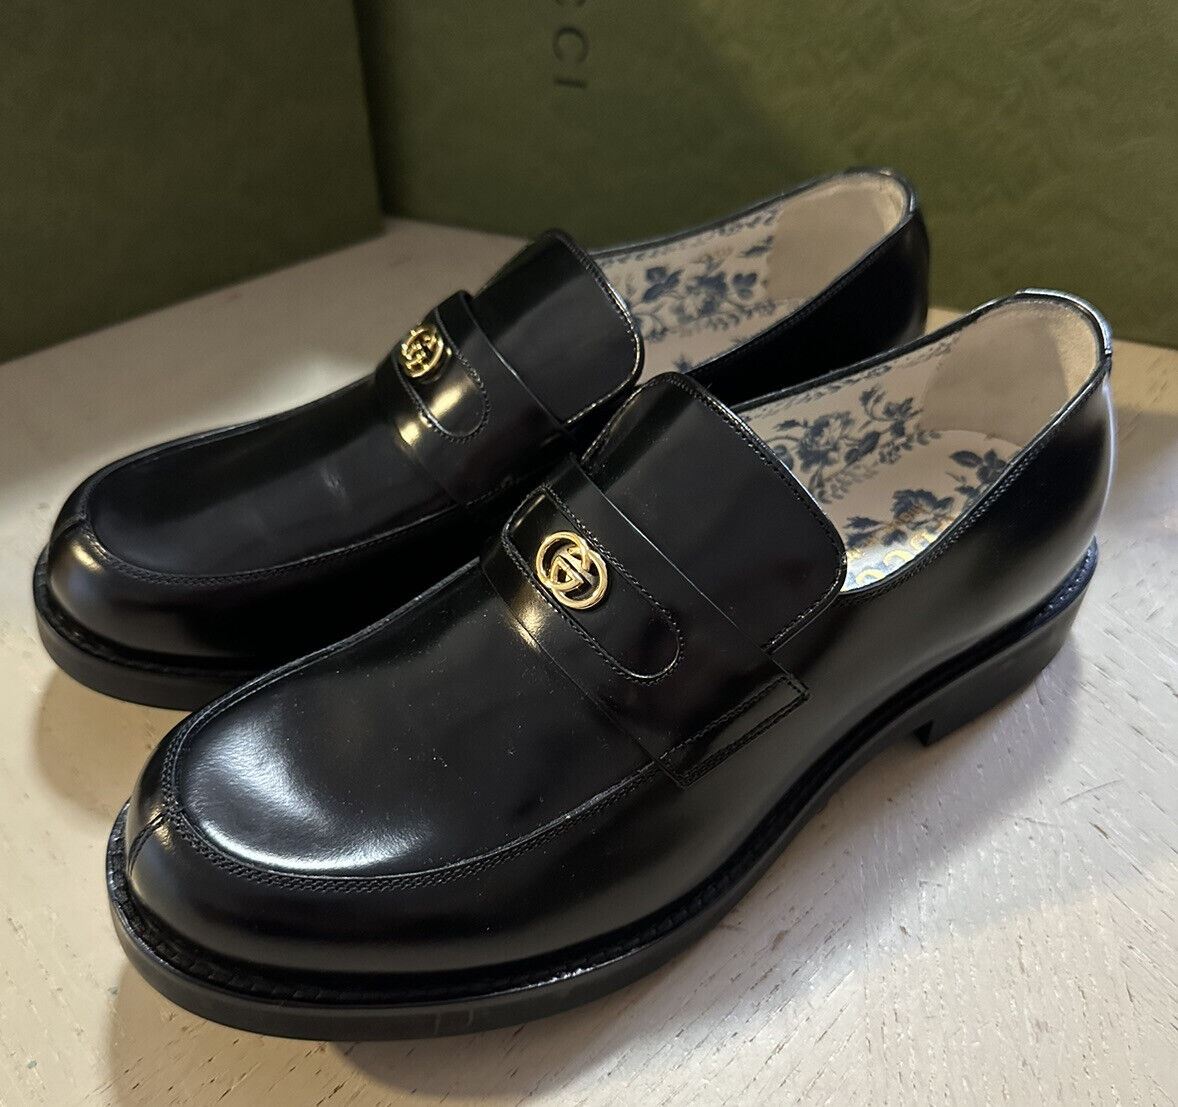 NIB $1400 Gucci Mens GG Leather Loafers Moccasin Shoes Black 7 US ( 6 Gucci )